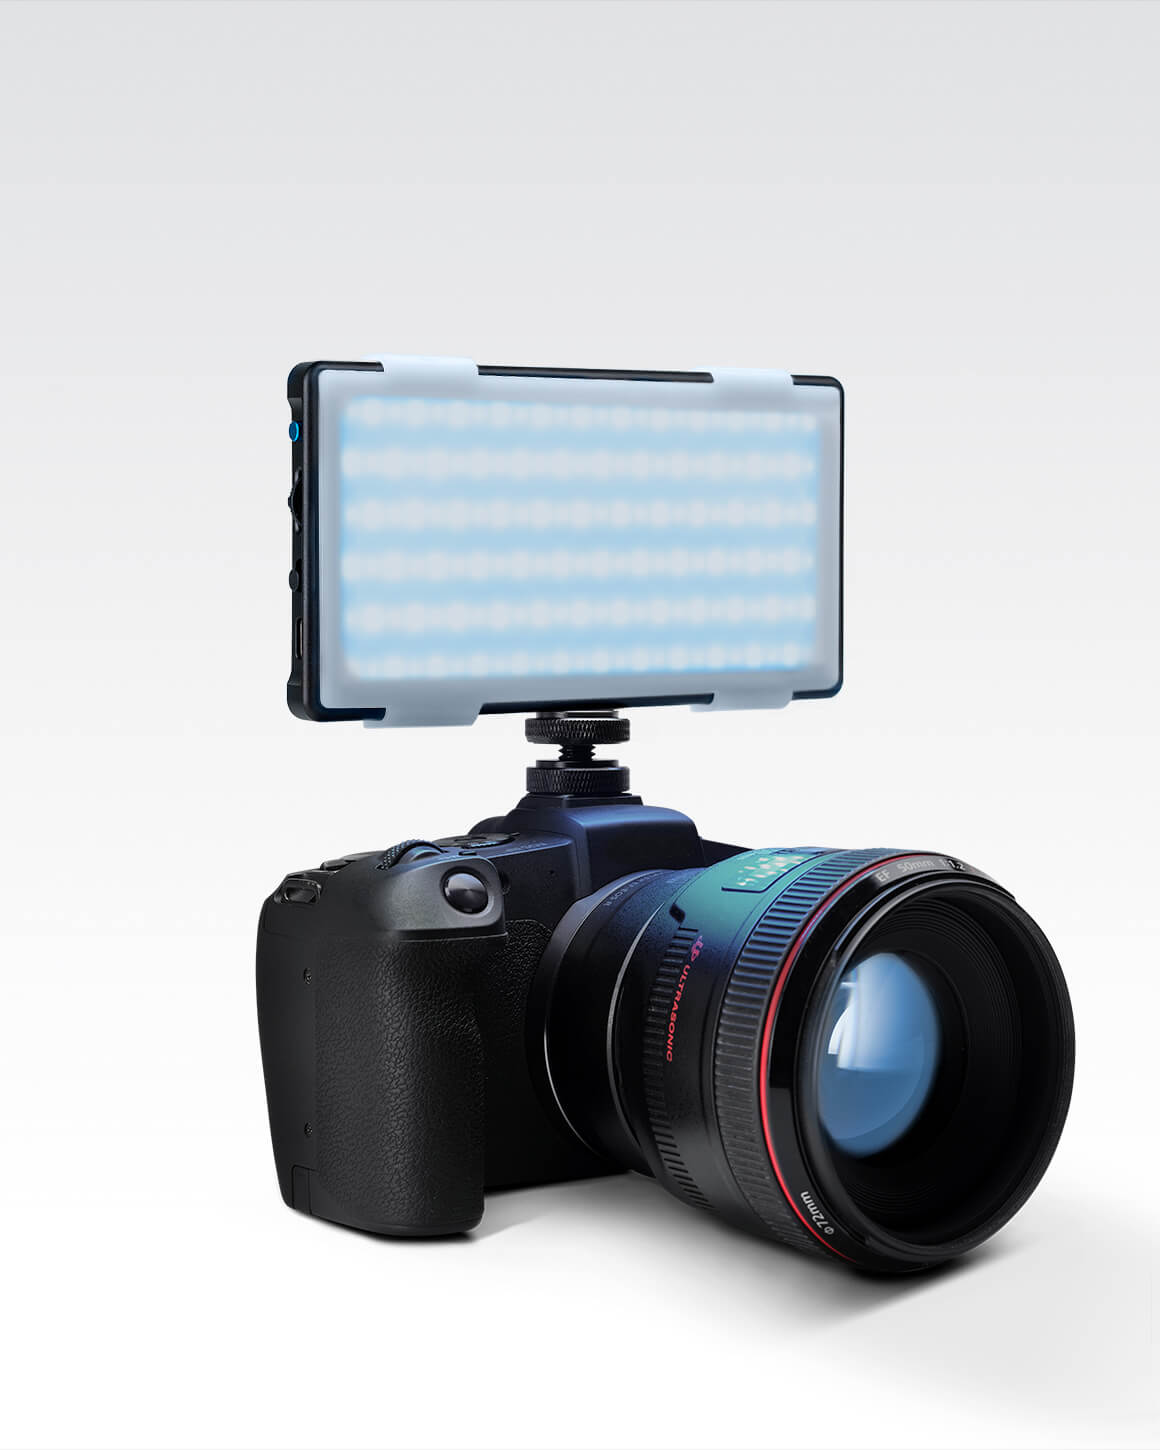 Products - Lighting, Cameras, Microphones, Software, Apps